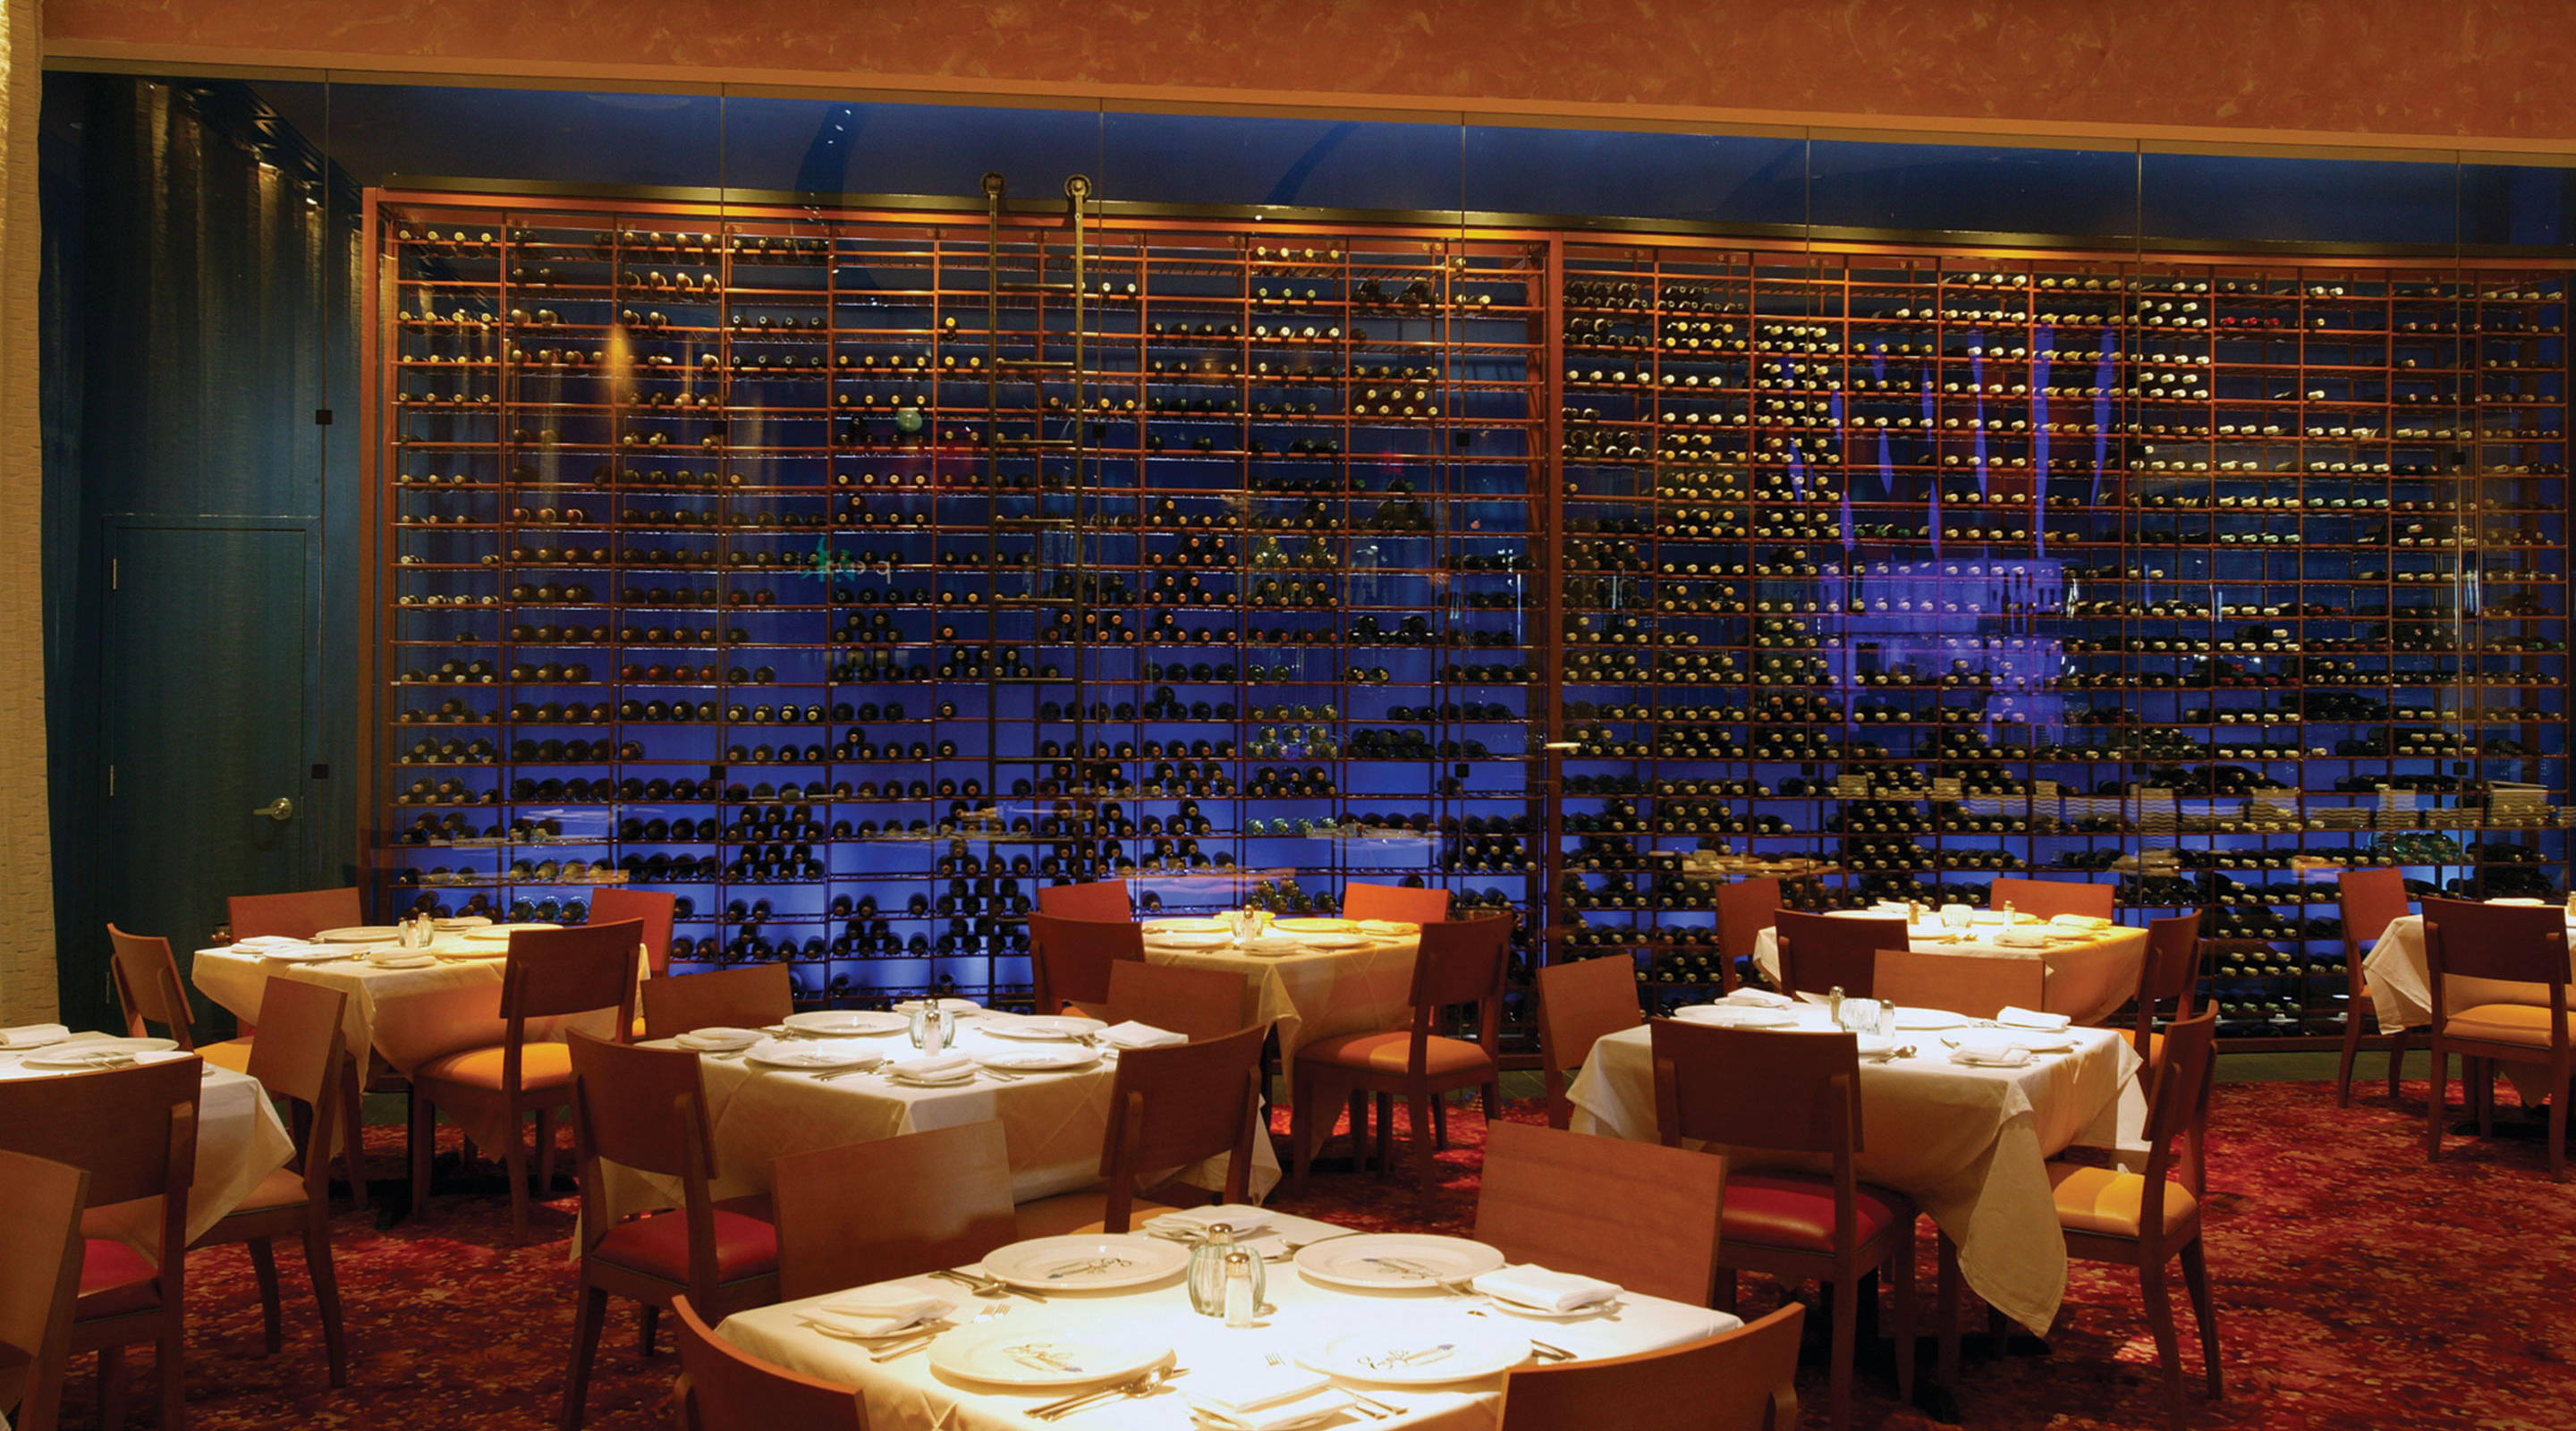 The dining room at Emeril's New Orleans Fish House